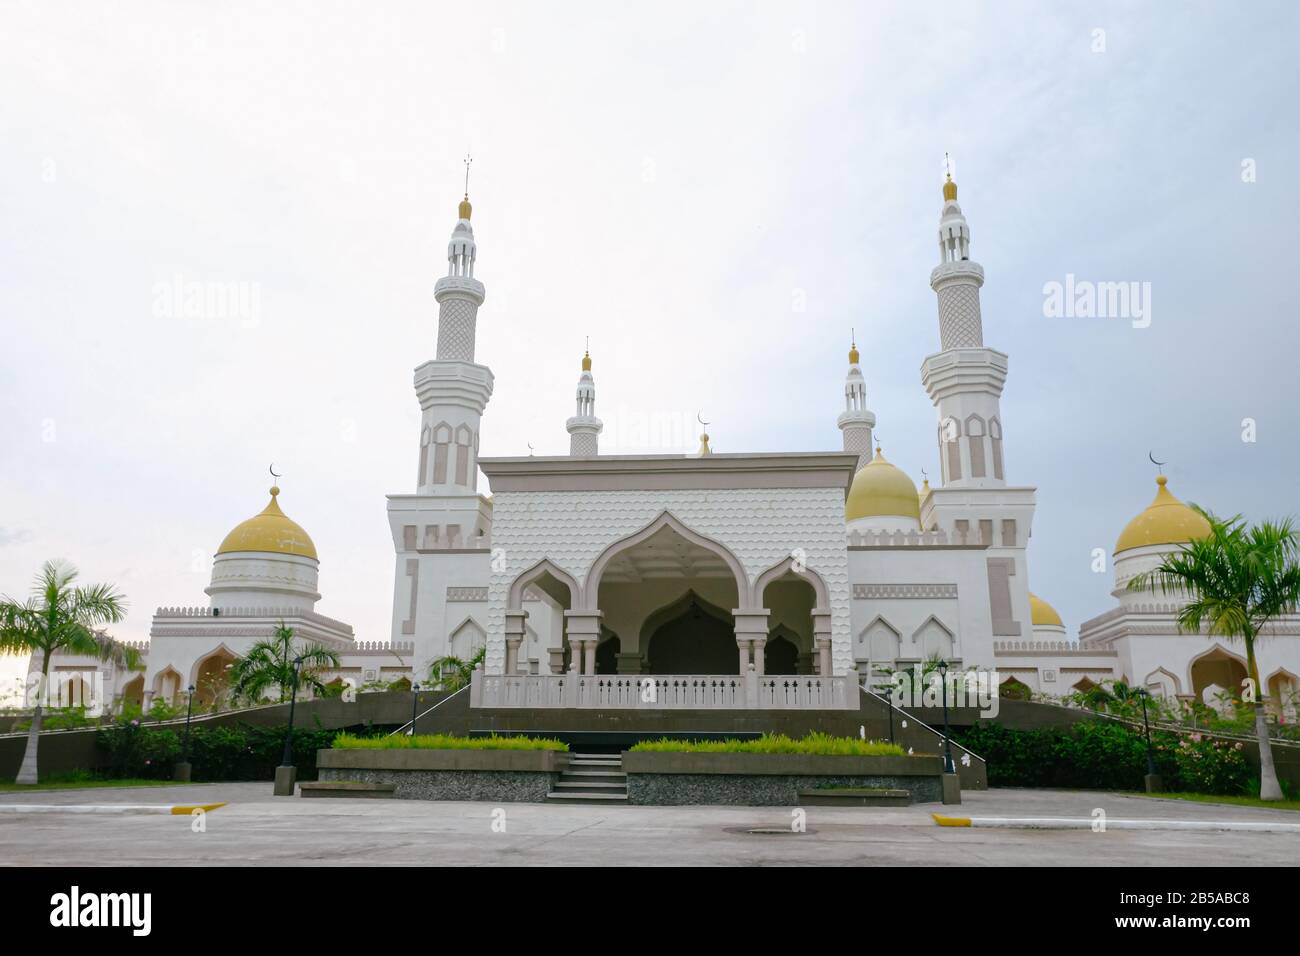 Beautiful outside view of the Cotabato Grand Mosque in Maguindanao, Philippines. Stock Photo